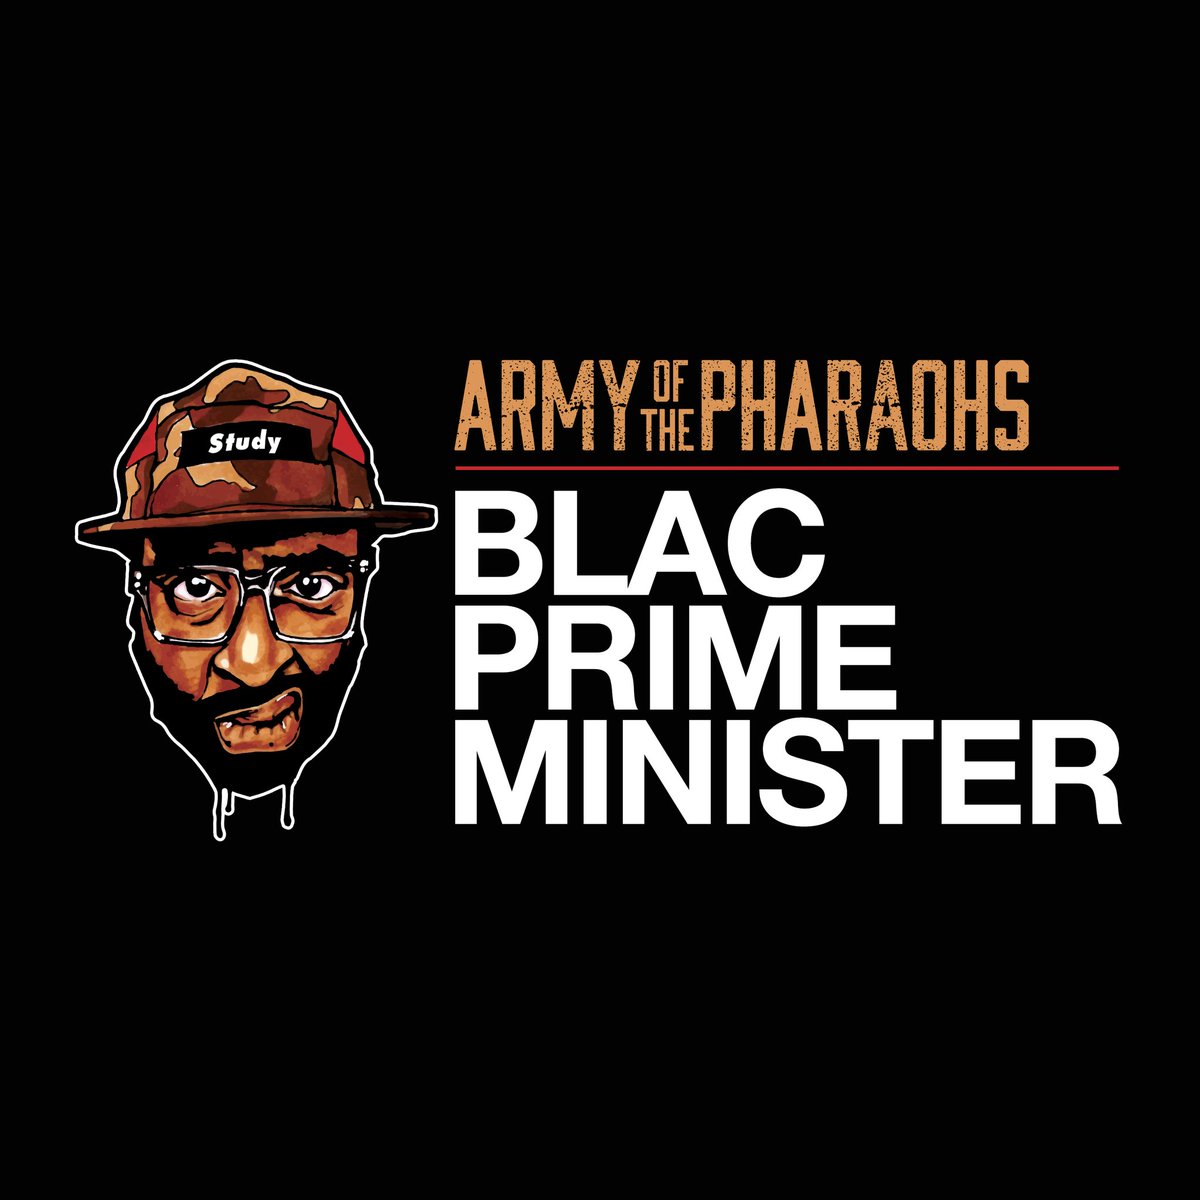 New AOTP single 'Blac Prime Minister' OUT NOW at blacastan.bandcamp.com + all digital outlets. All royalties from this song will go towards Blacastan's funeral + headstone expenses. You can still purchase an AOTP Blac Prime Minister shirt and hoodie from JMTstore.com